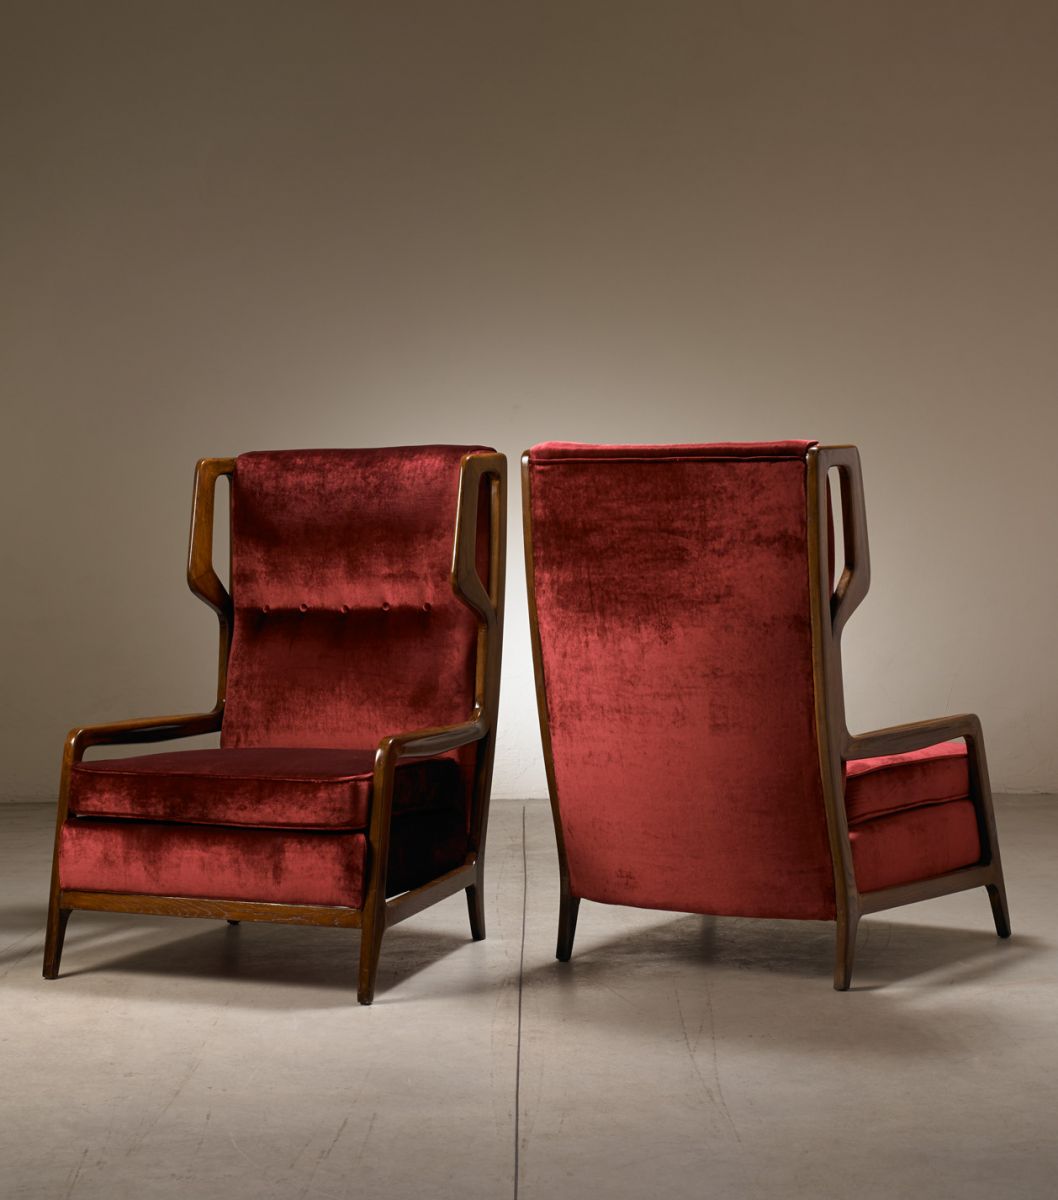 Two armchairs Gio Ponti pic-1